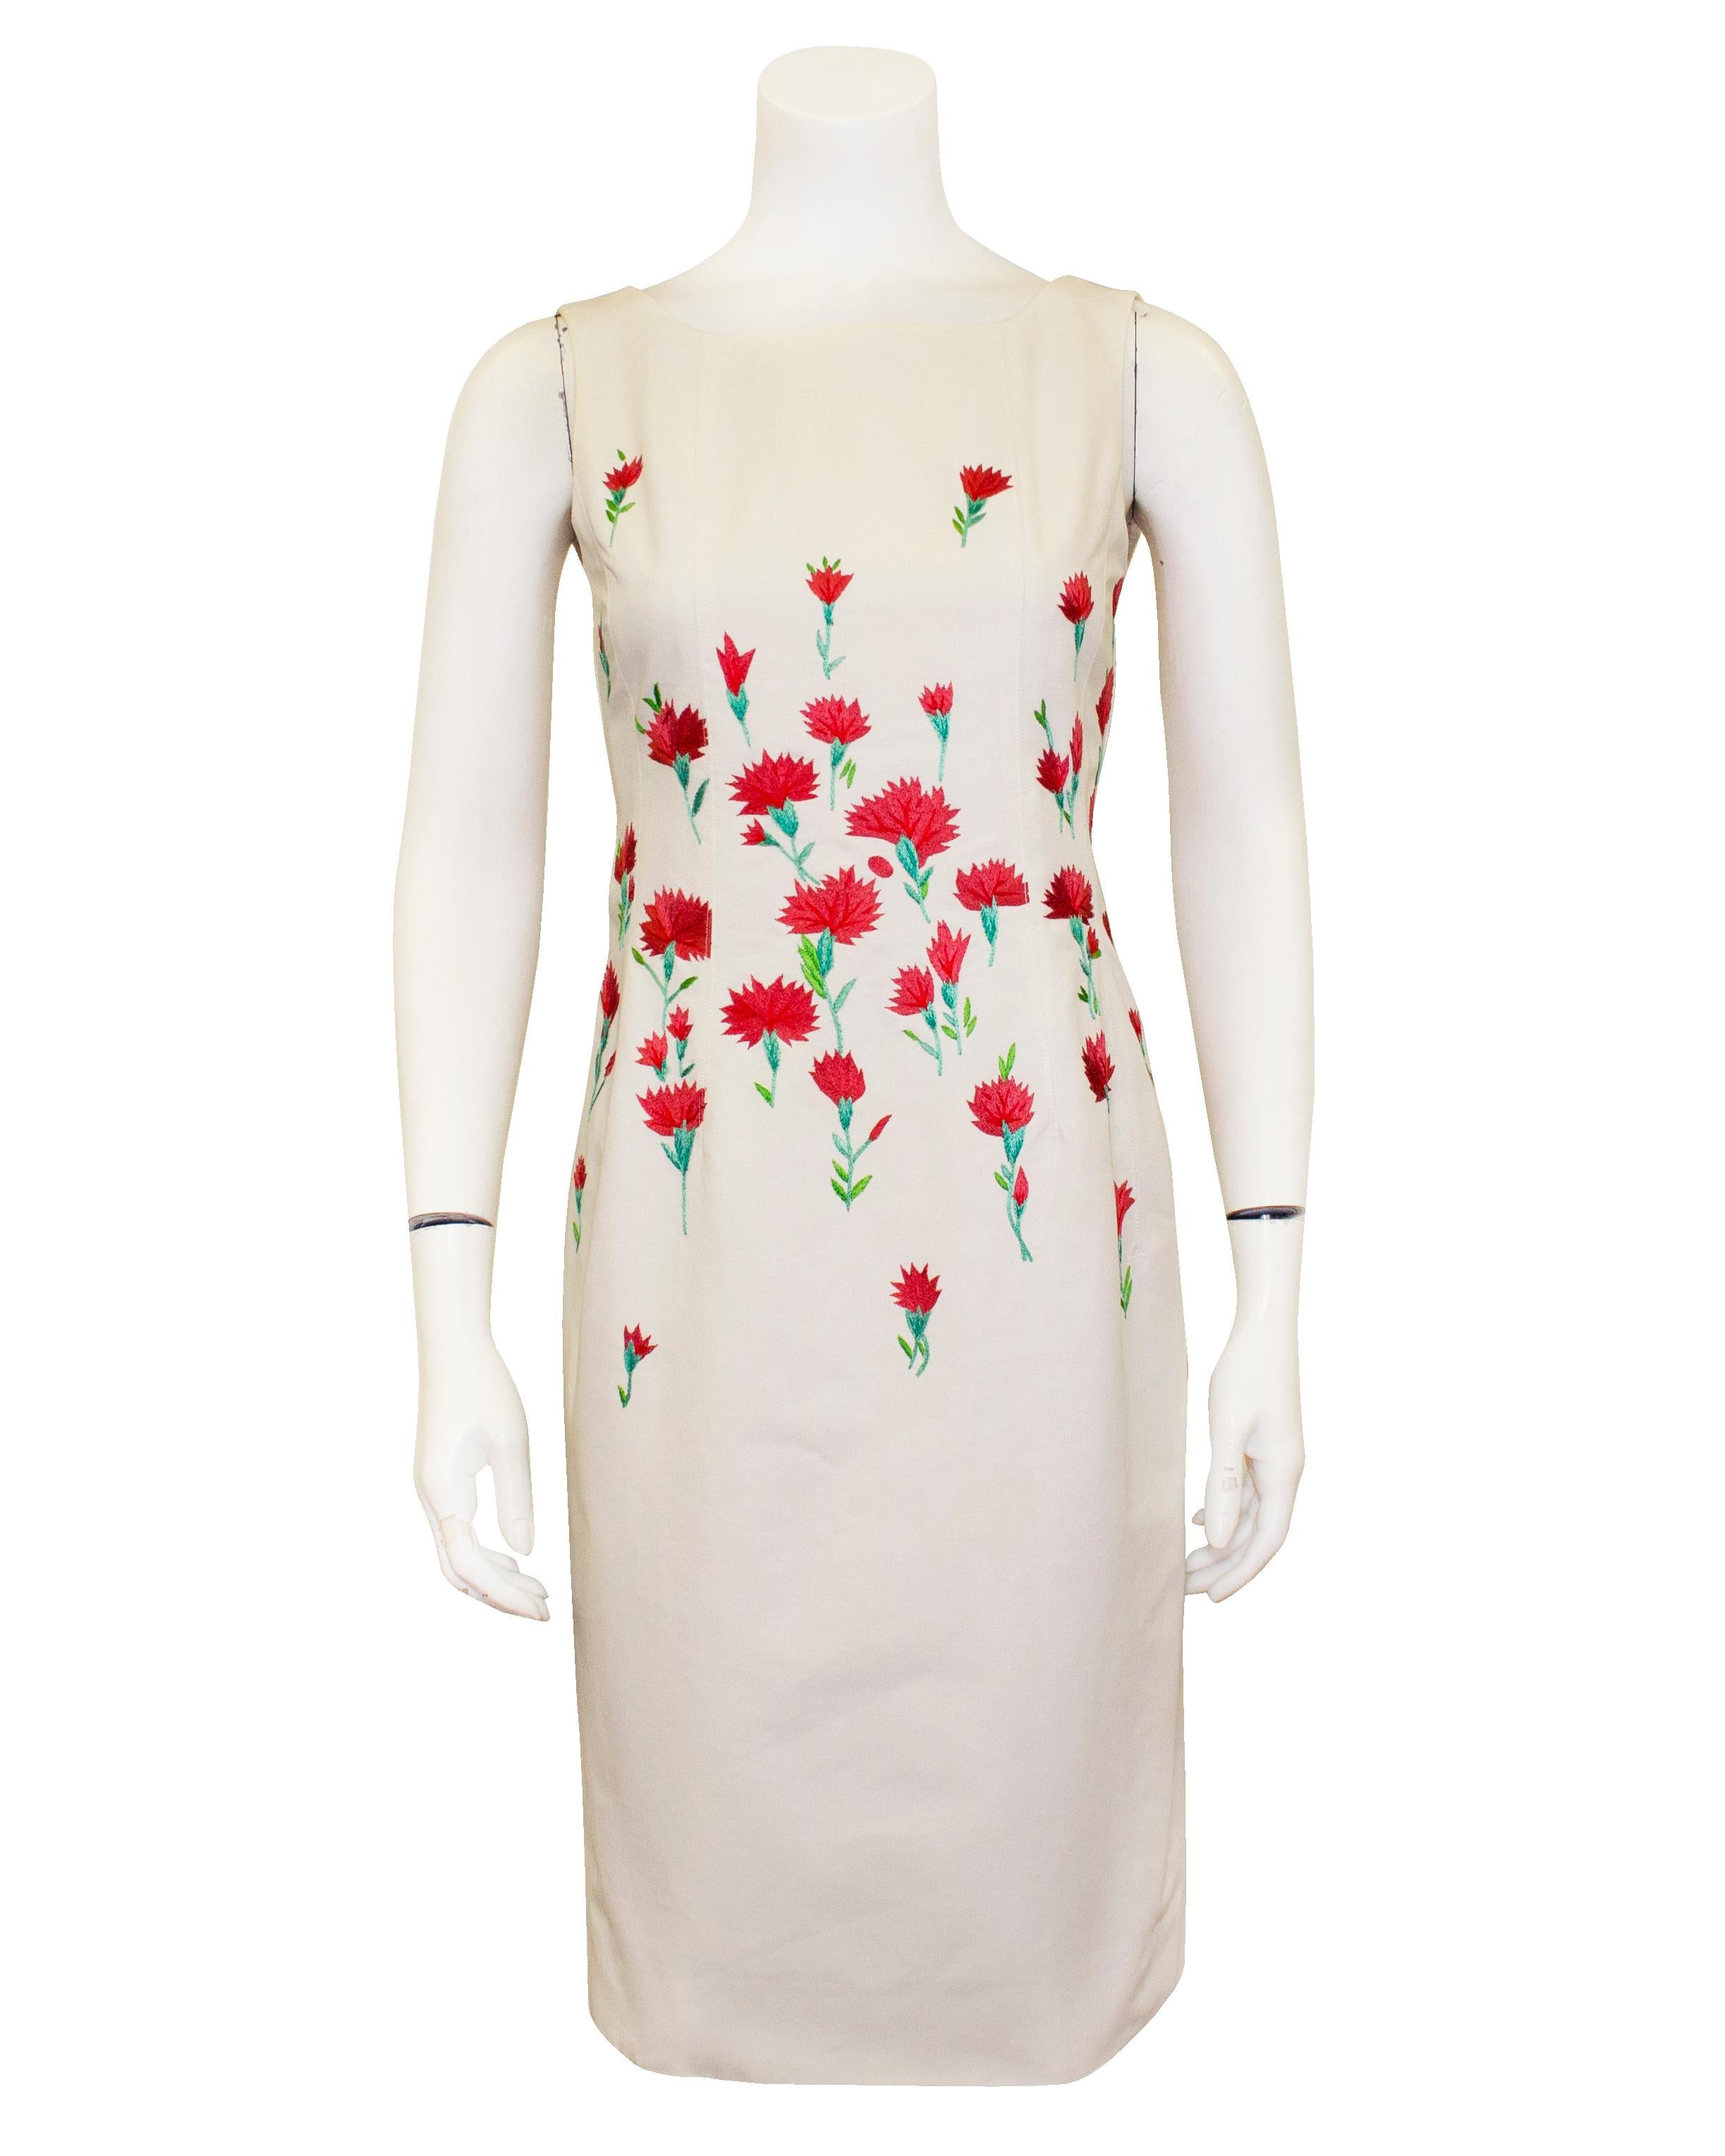 Early 2000s Oscar de la Renta Carnation Embroidered Dress and Cardigan Ensemble  For Sale 2